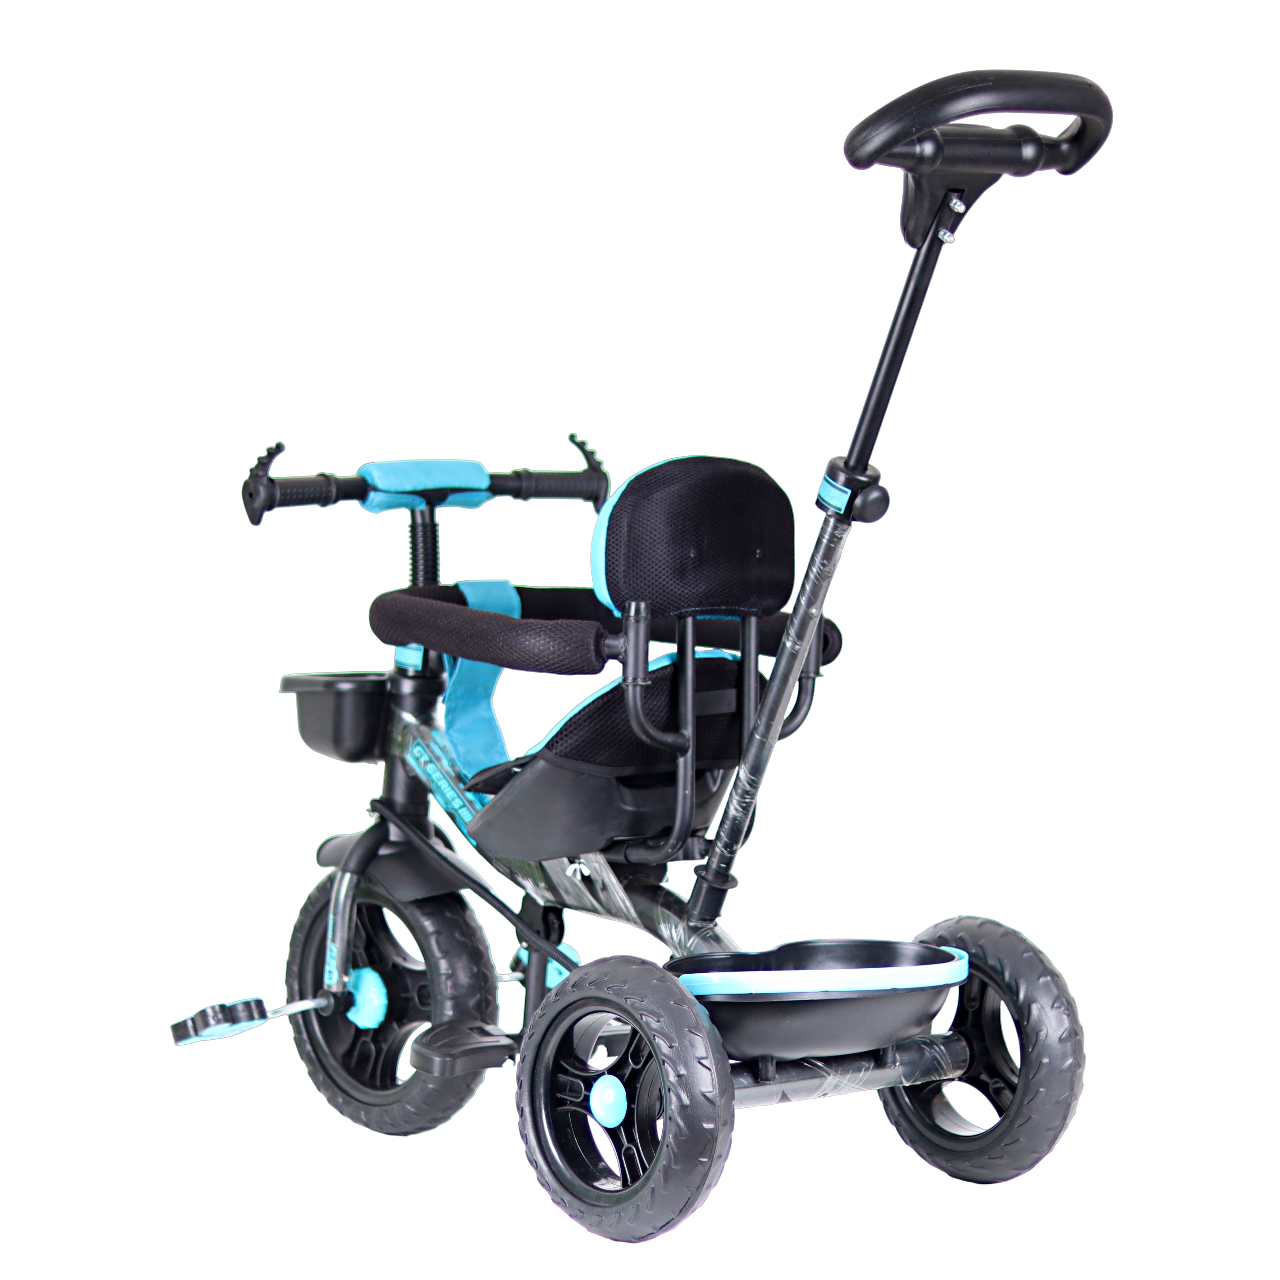 Luusa GT-1 Tricycle For Kids Plug N Play baby Cycle With Parent Handle Blue